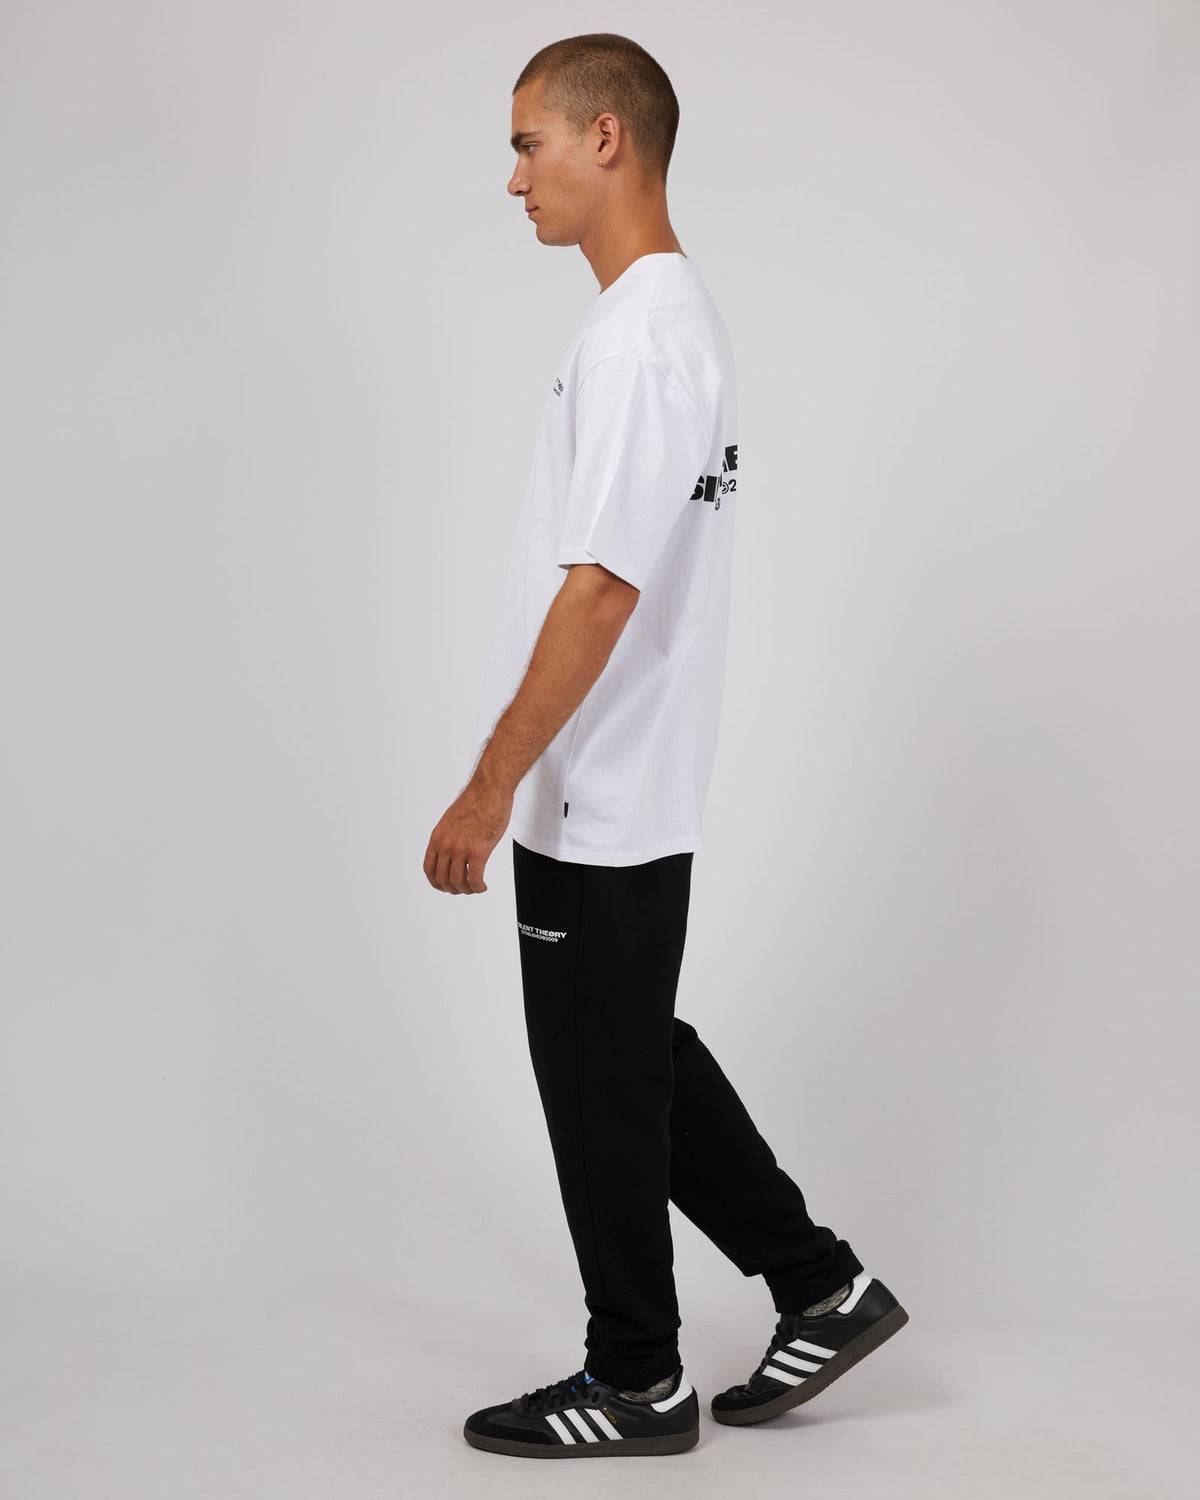 Silent Theory-Essential Theory Tee White-Edge Clothing